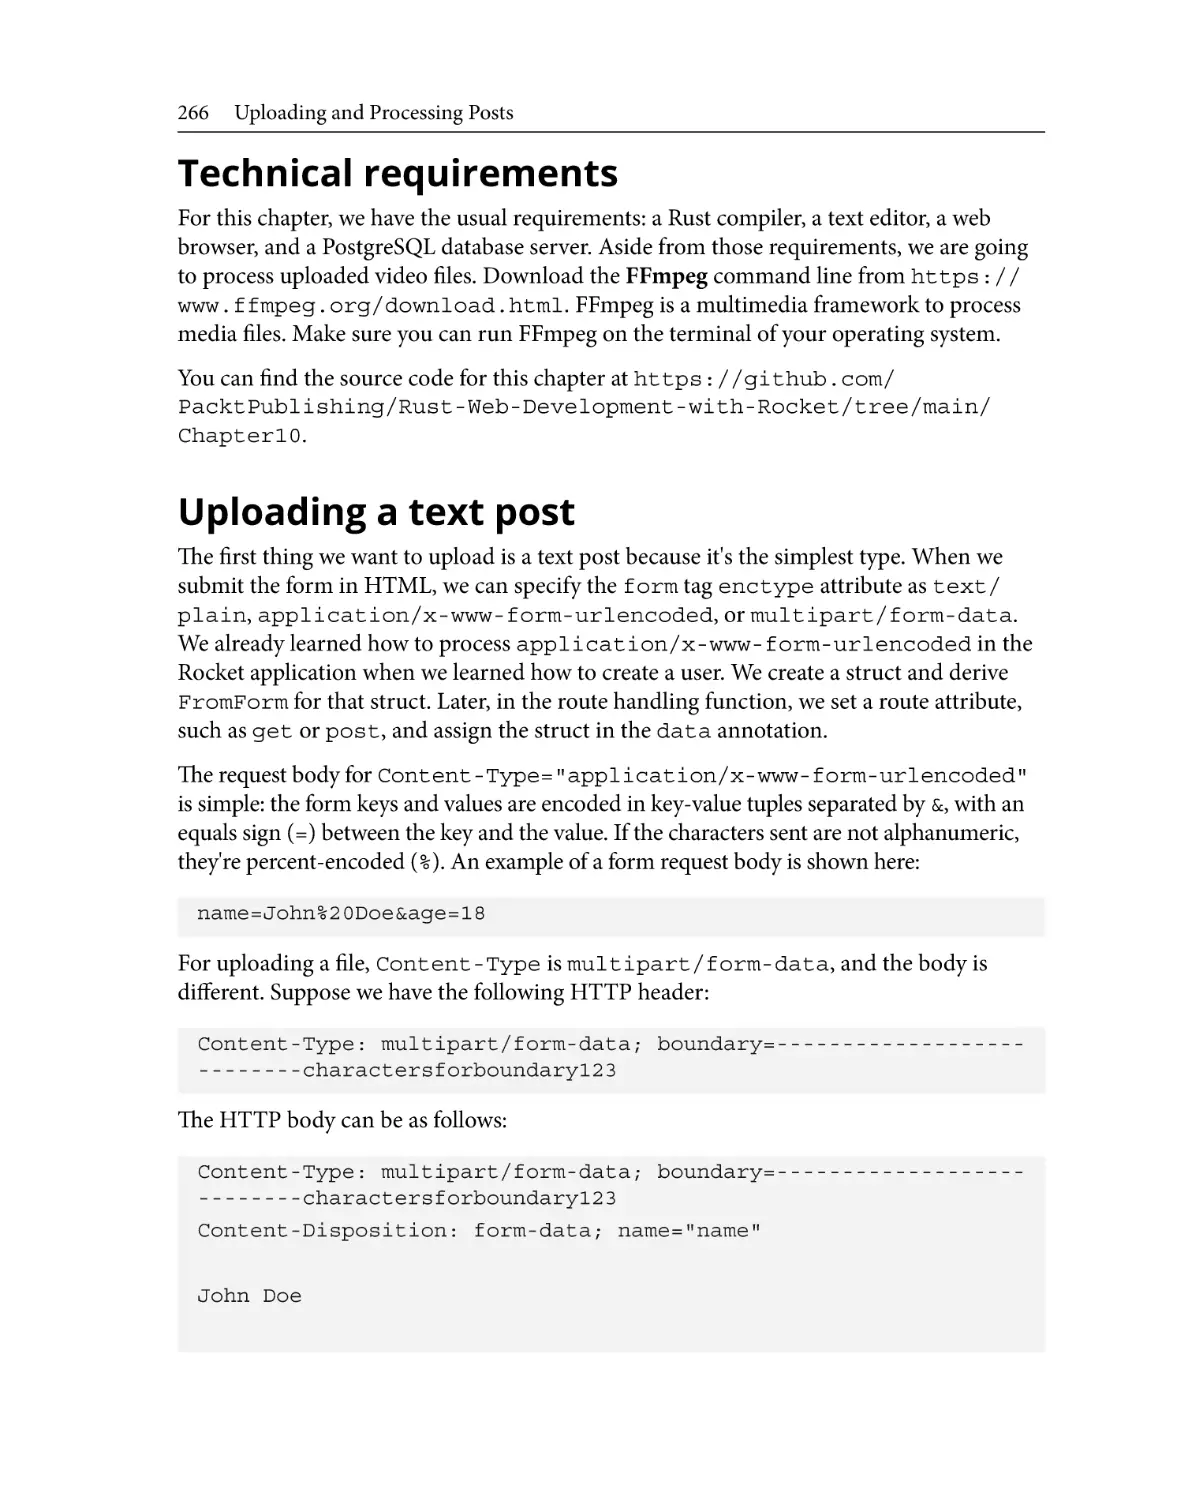 Technical requirements
Uploading a text post